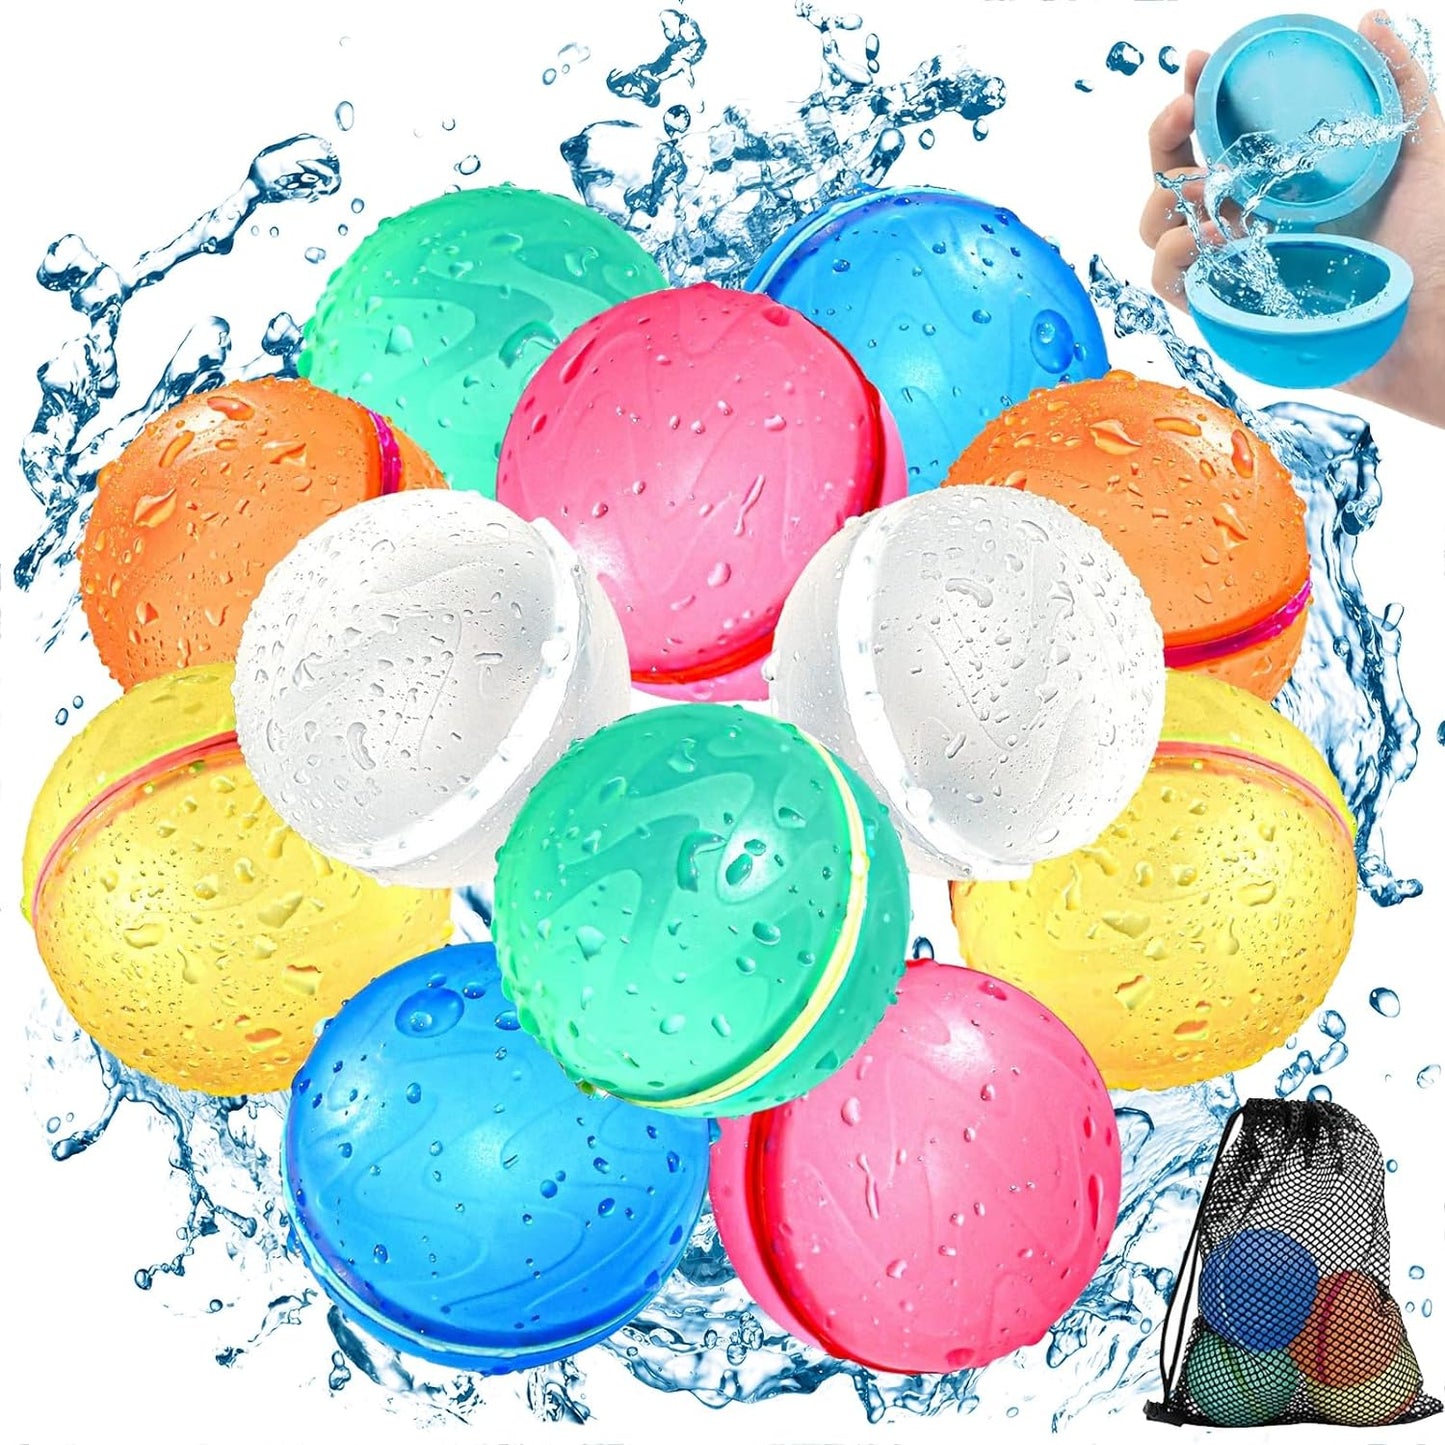 Reusable Water Balloons, Magnetic Refillable Water Balls, Summer Outdoor Water Toy for Kids and Adults, Self Sealing Quick Fill Water Balloons Pool Beach Toys for Boys and Girls (12 Pcs)